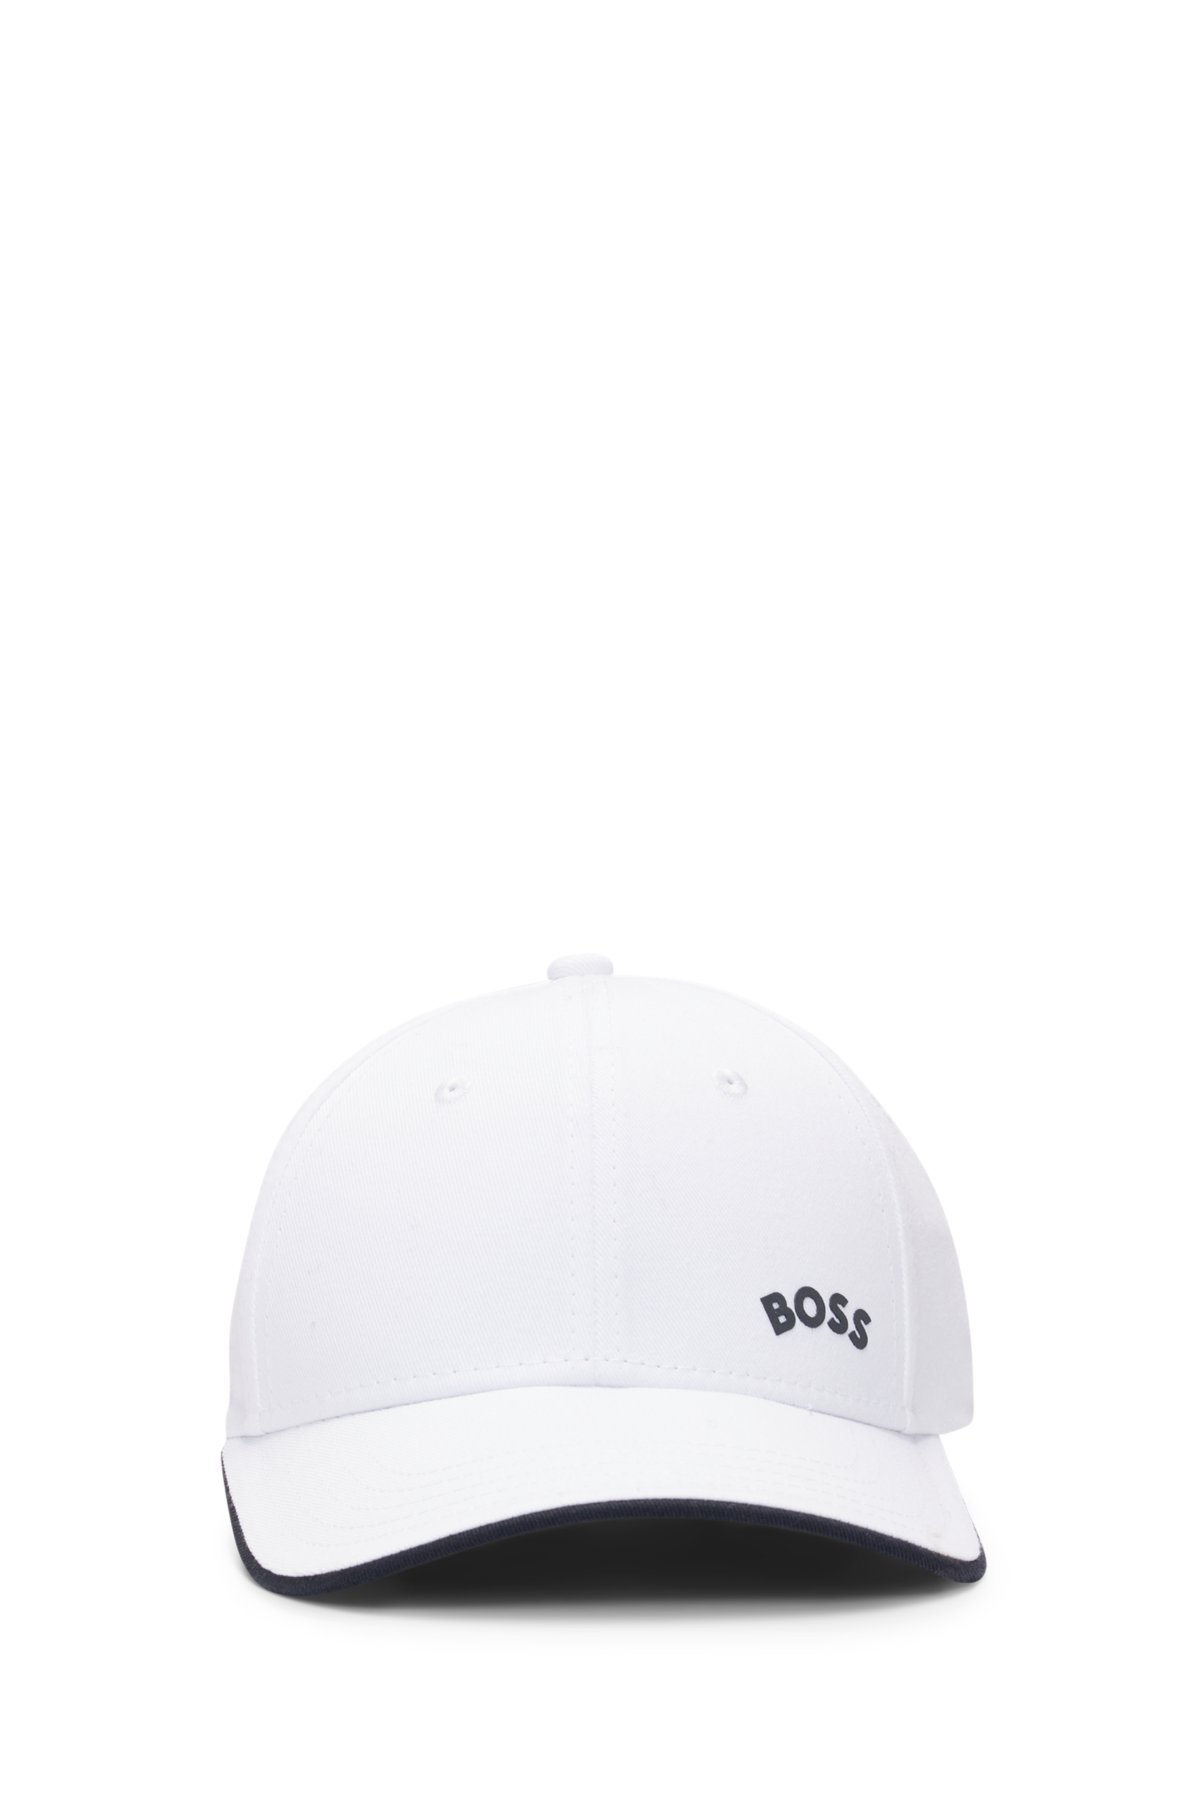 - BOSS cap curved logo with Cotton-twill